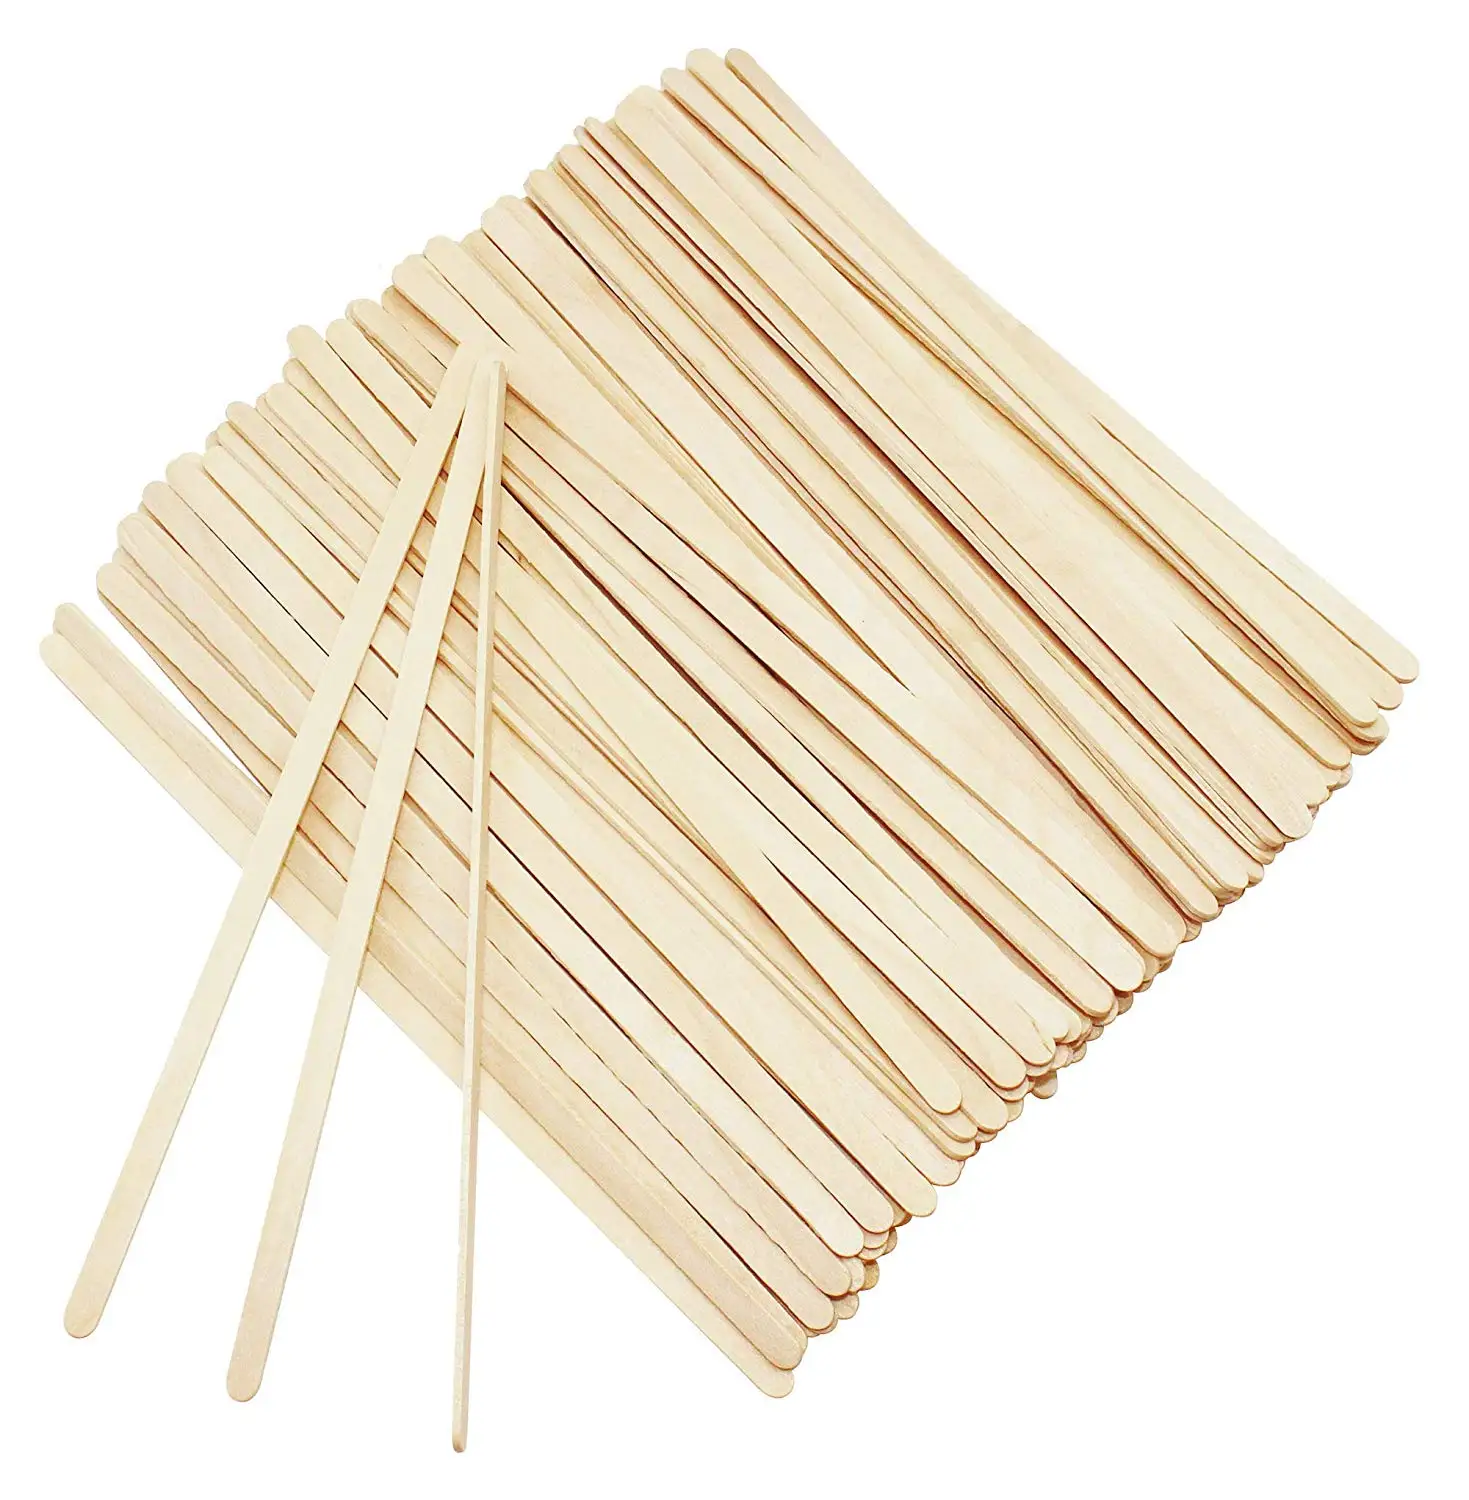 Disposable Paper Wrapped Wooden Coffee Stir Sticks Wood Tea Beverage Stirrers 7.5 Inch 500 Pcs